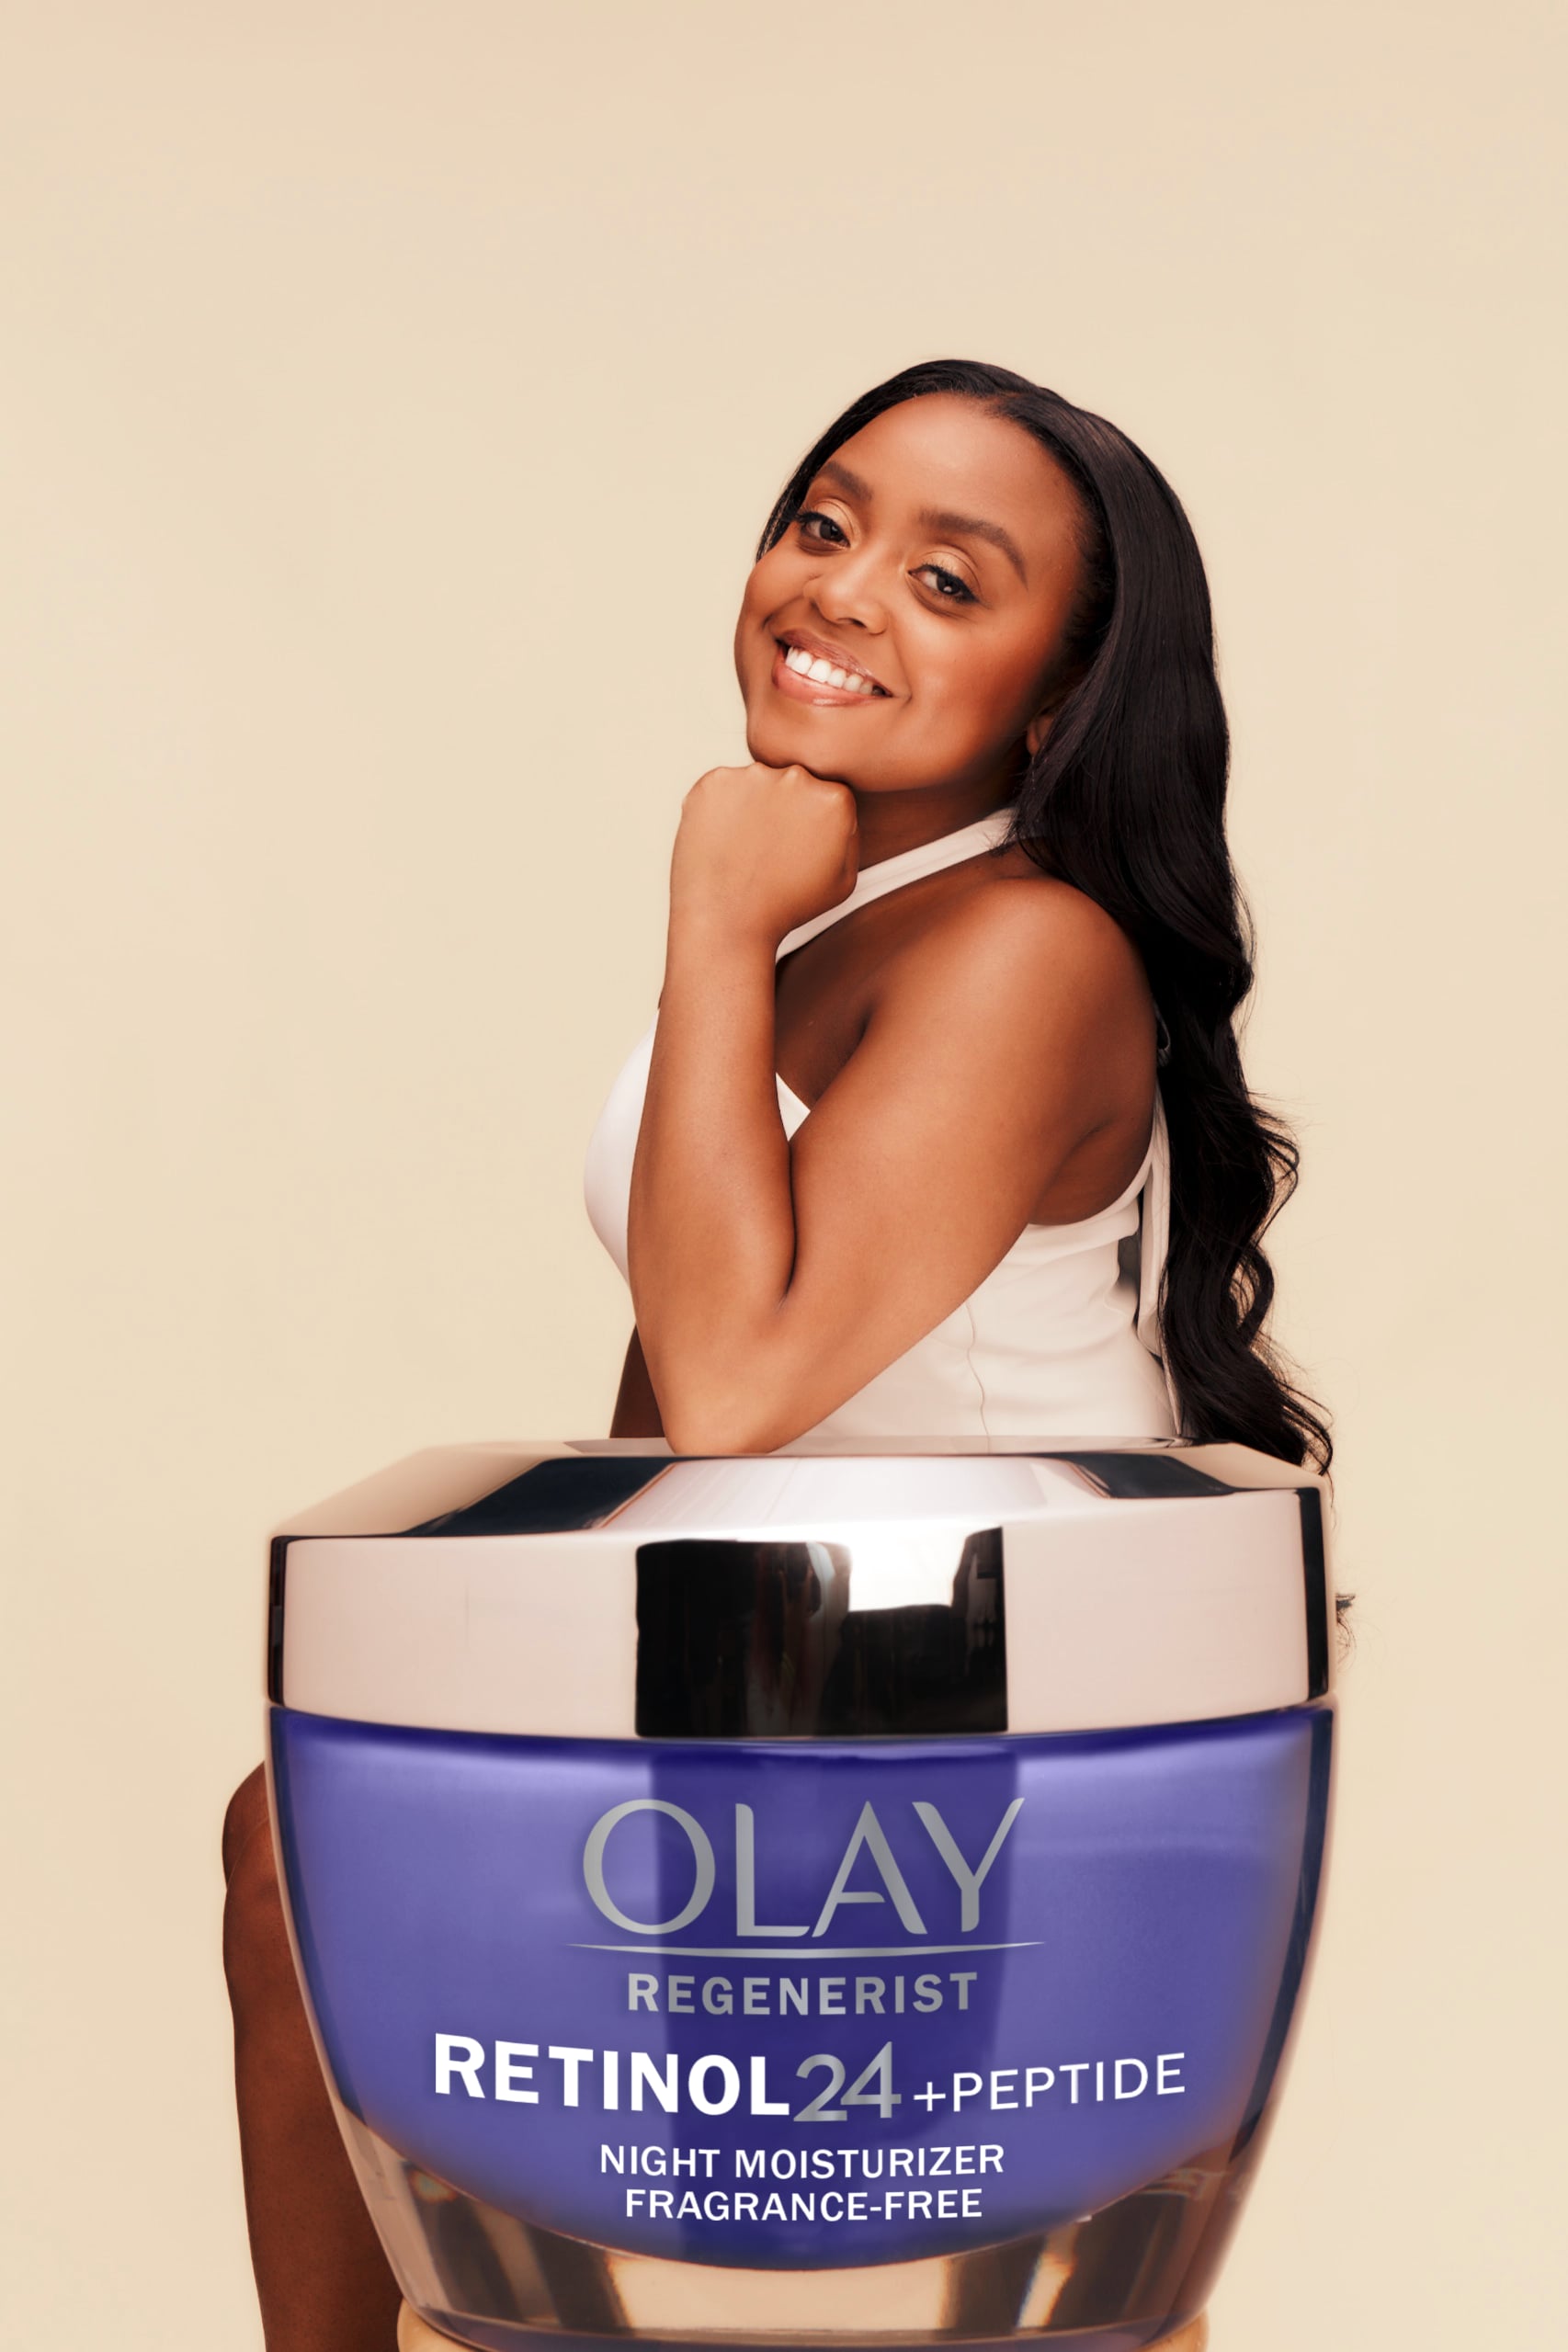 Quinta Brunson on Pores and skin Care and Drugstore Magnificence Merchandise